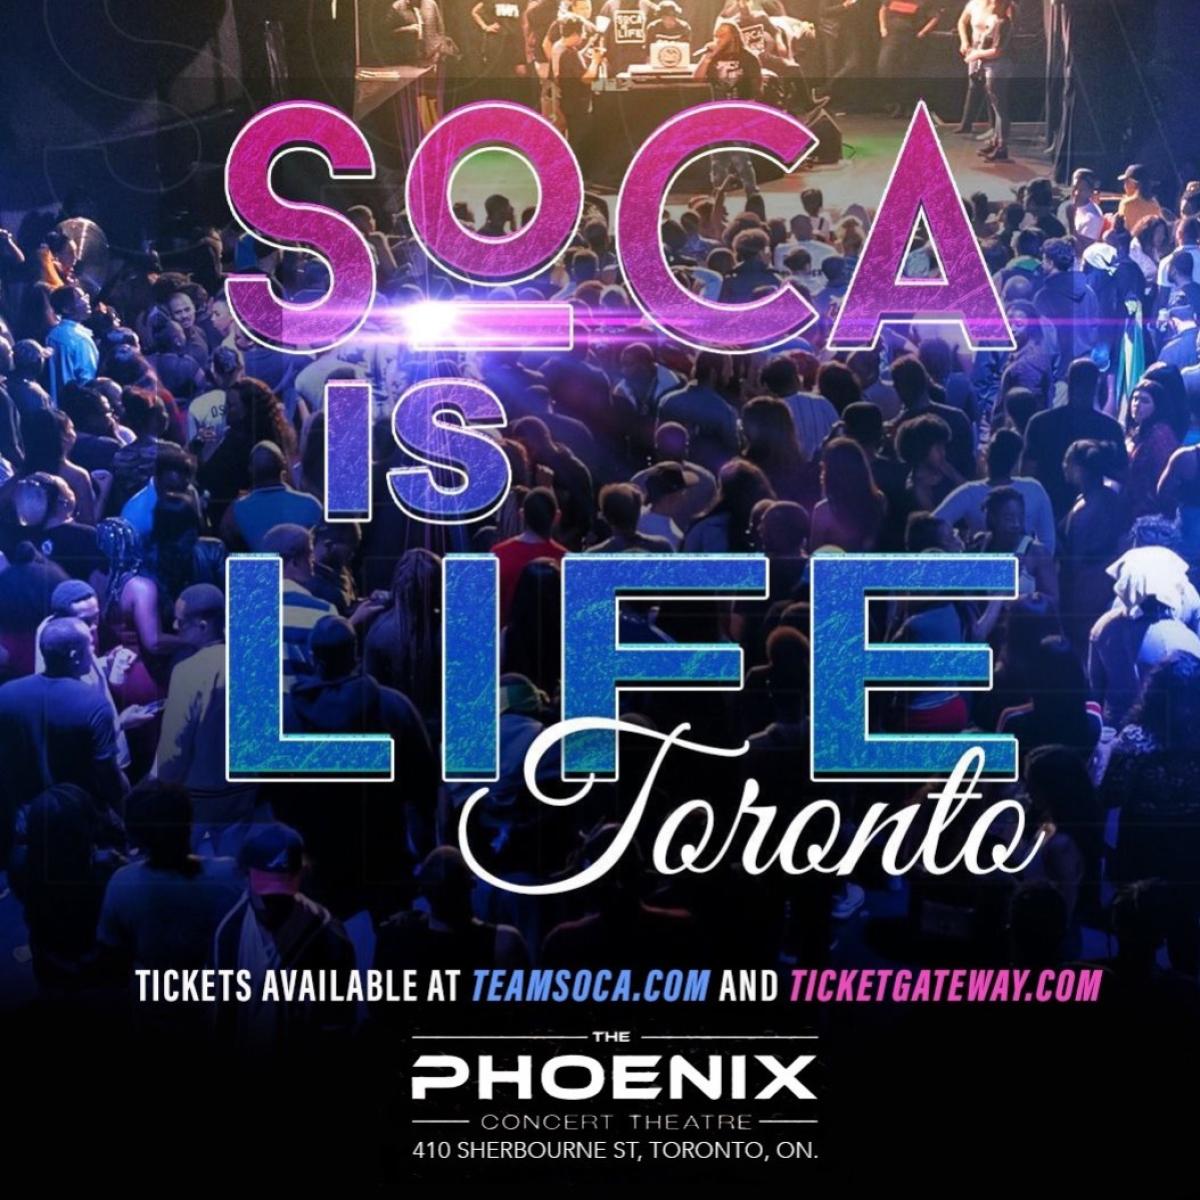 Soca Is Life  flyer or graphic.